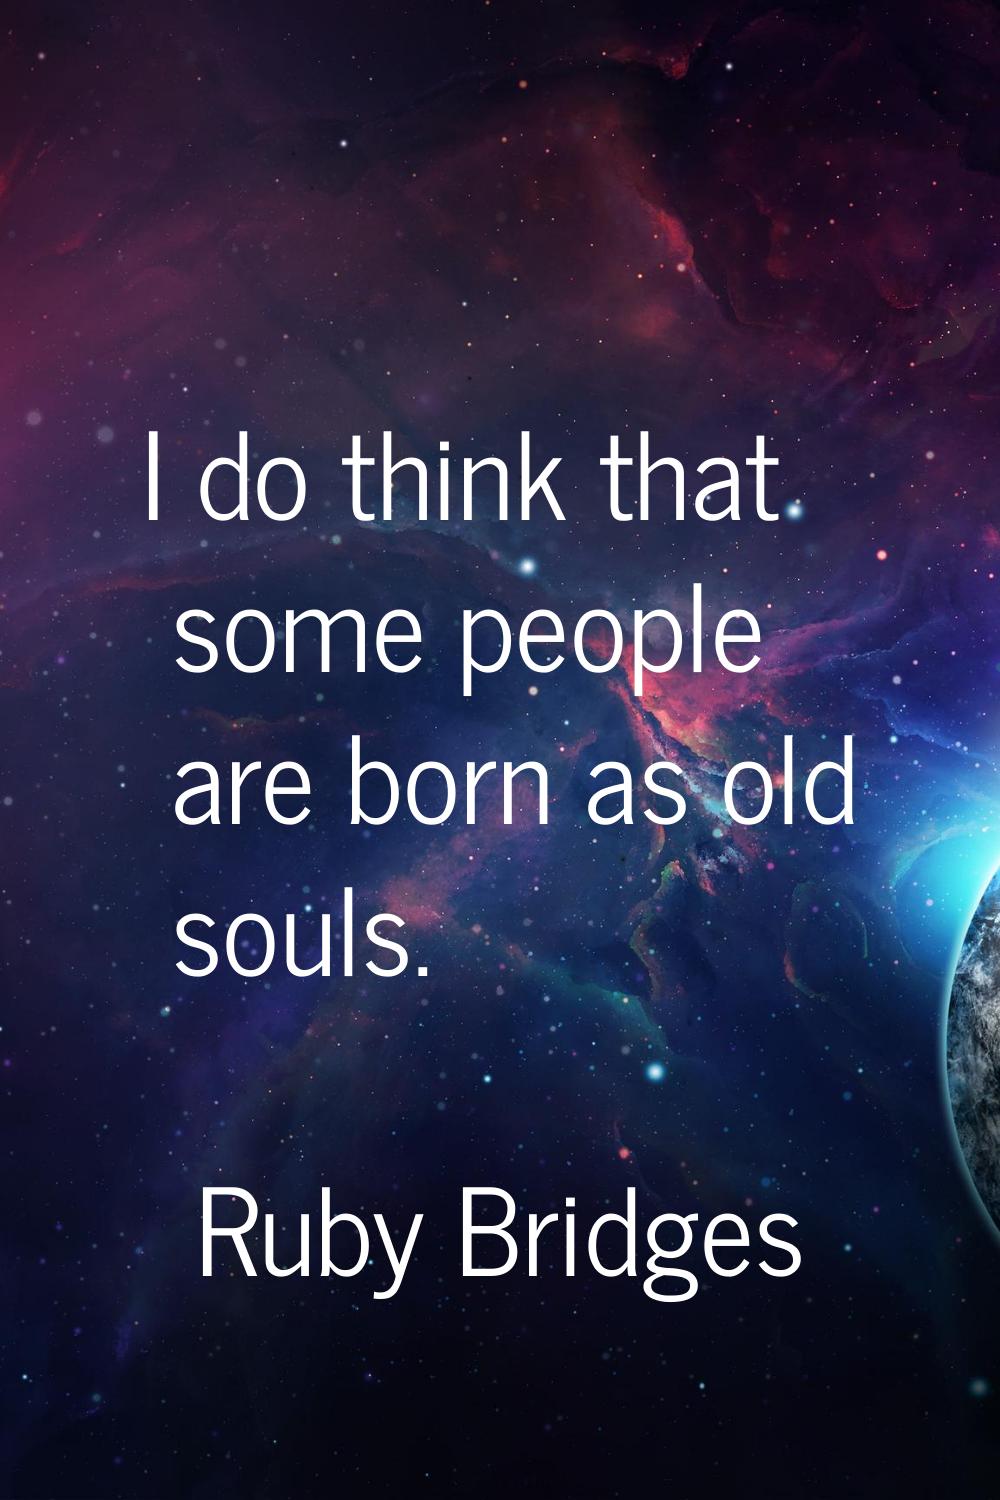 I do think that some people are born as old souls.